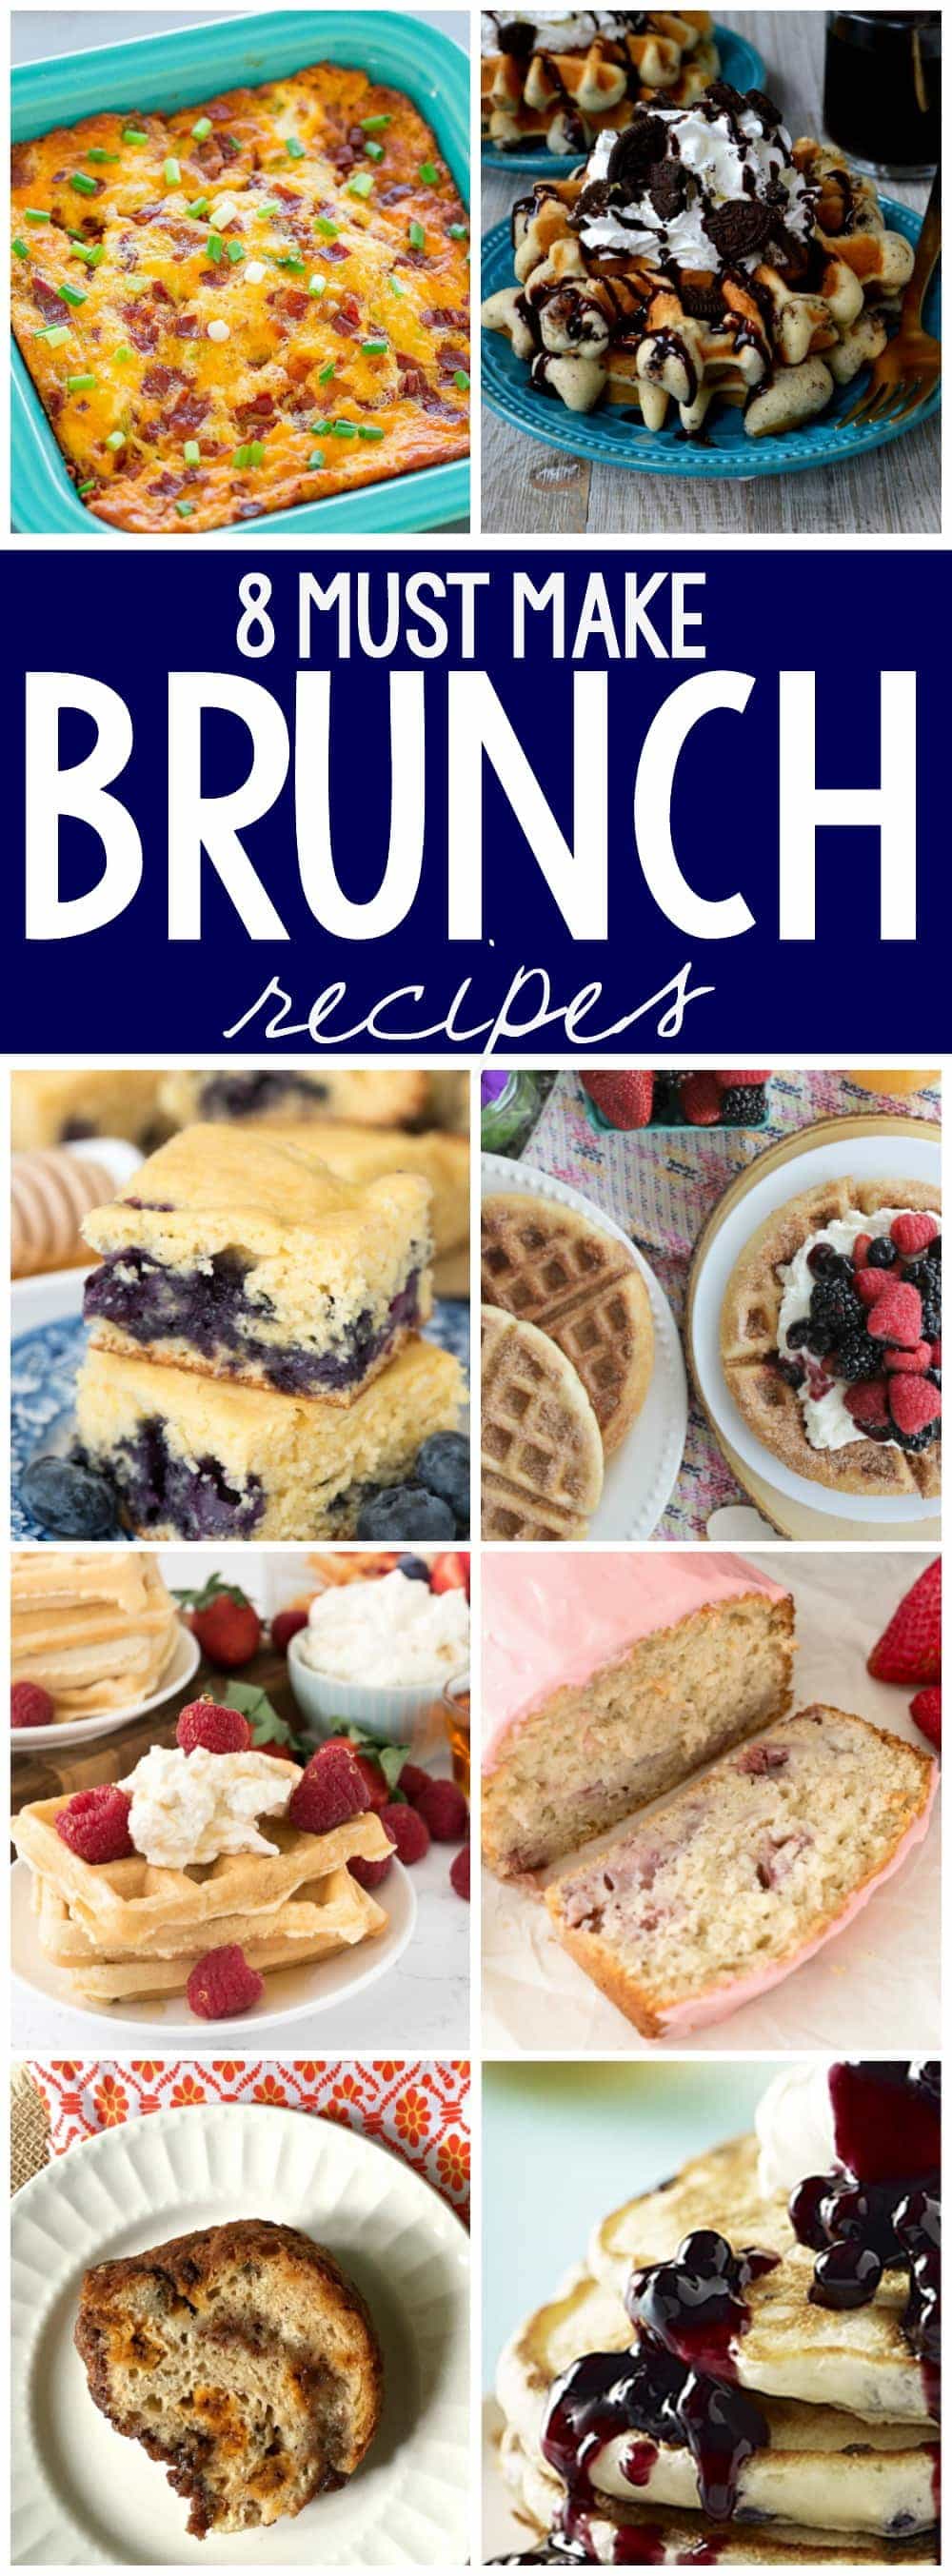 8 EASY Brunch Recipes you MUST make ASAP! These recipes all start with a mix so they're on the table in no time at all. From bread to pancakes to eggs, every favorite recipe is here!